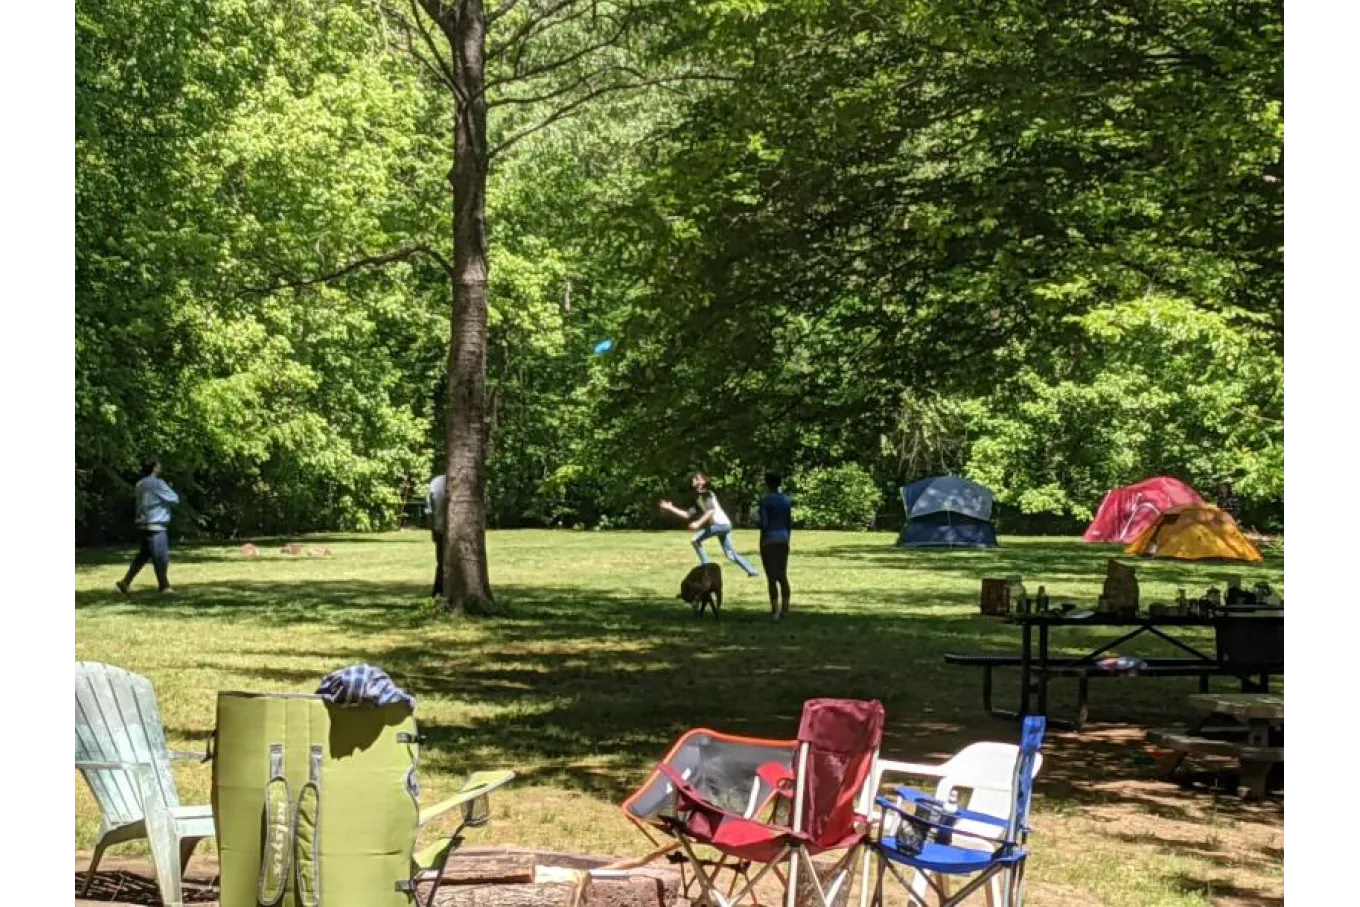 Photo of a campsite with three tents, outdoor chairs, and people playing frisbee.